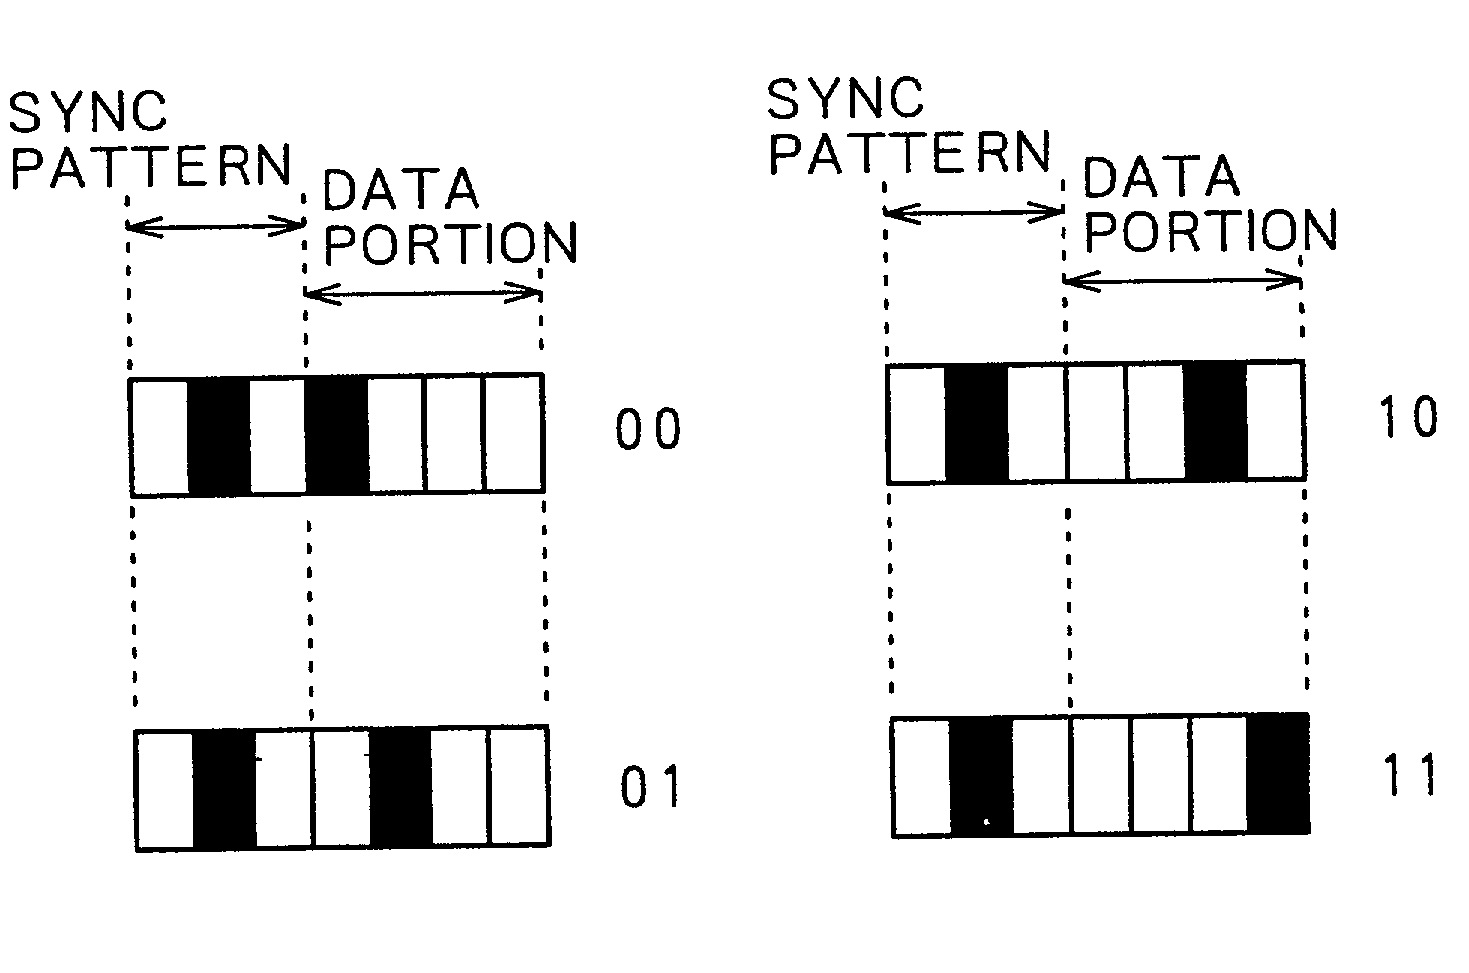 Concentrically recording auxiliary information on non-data area of a disk-like recording medium